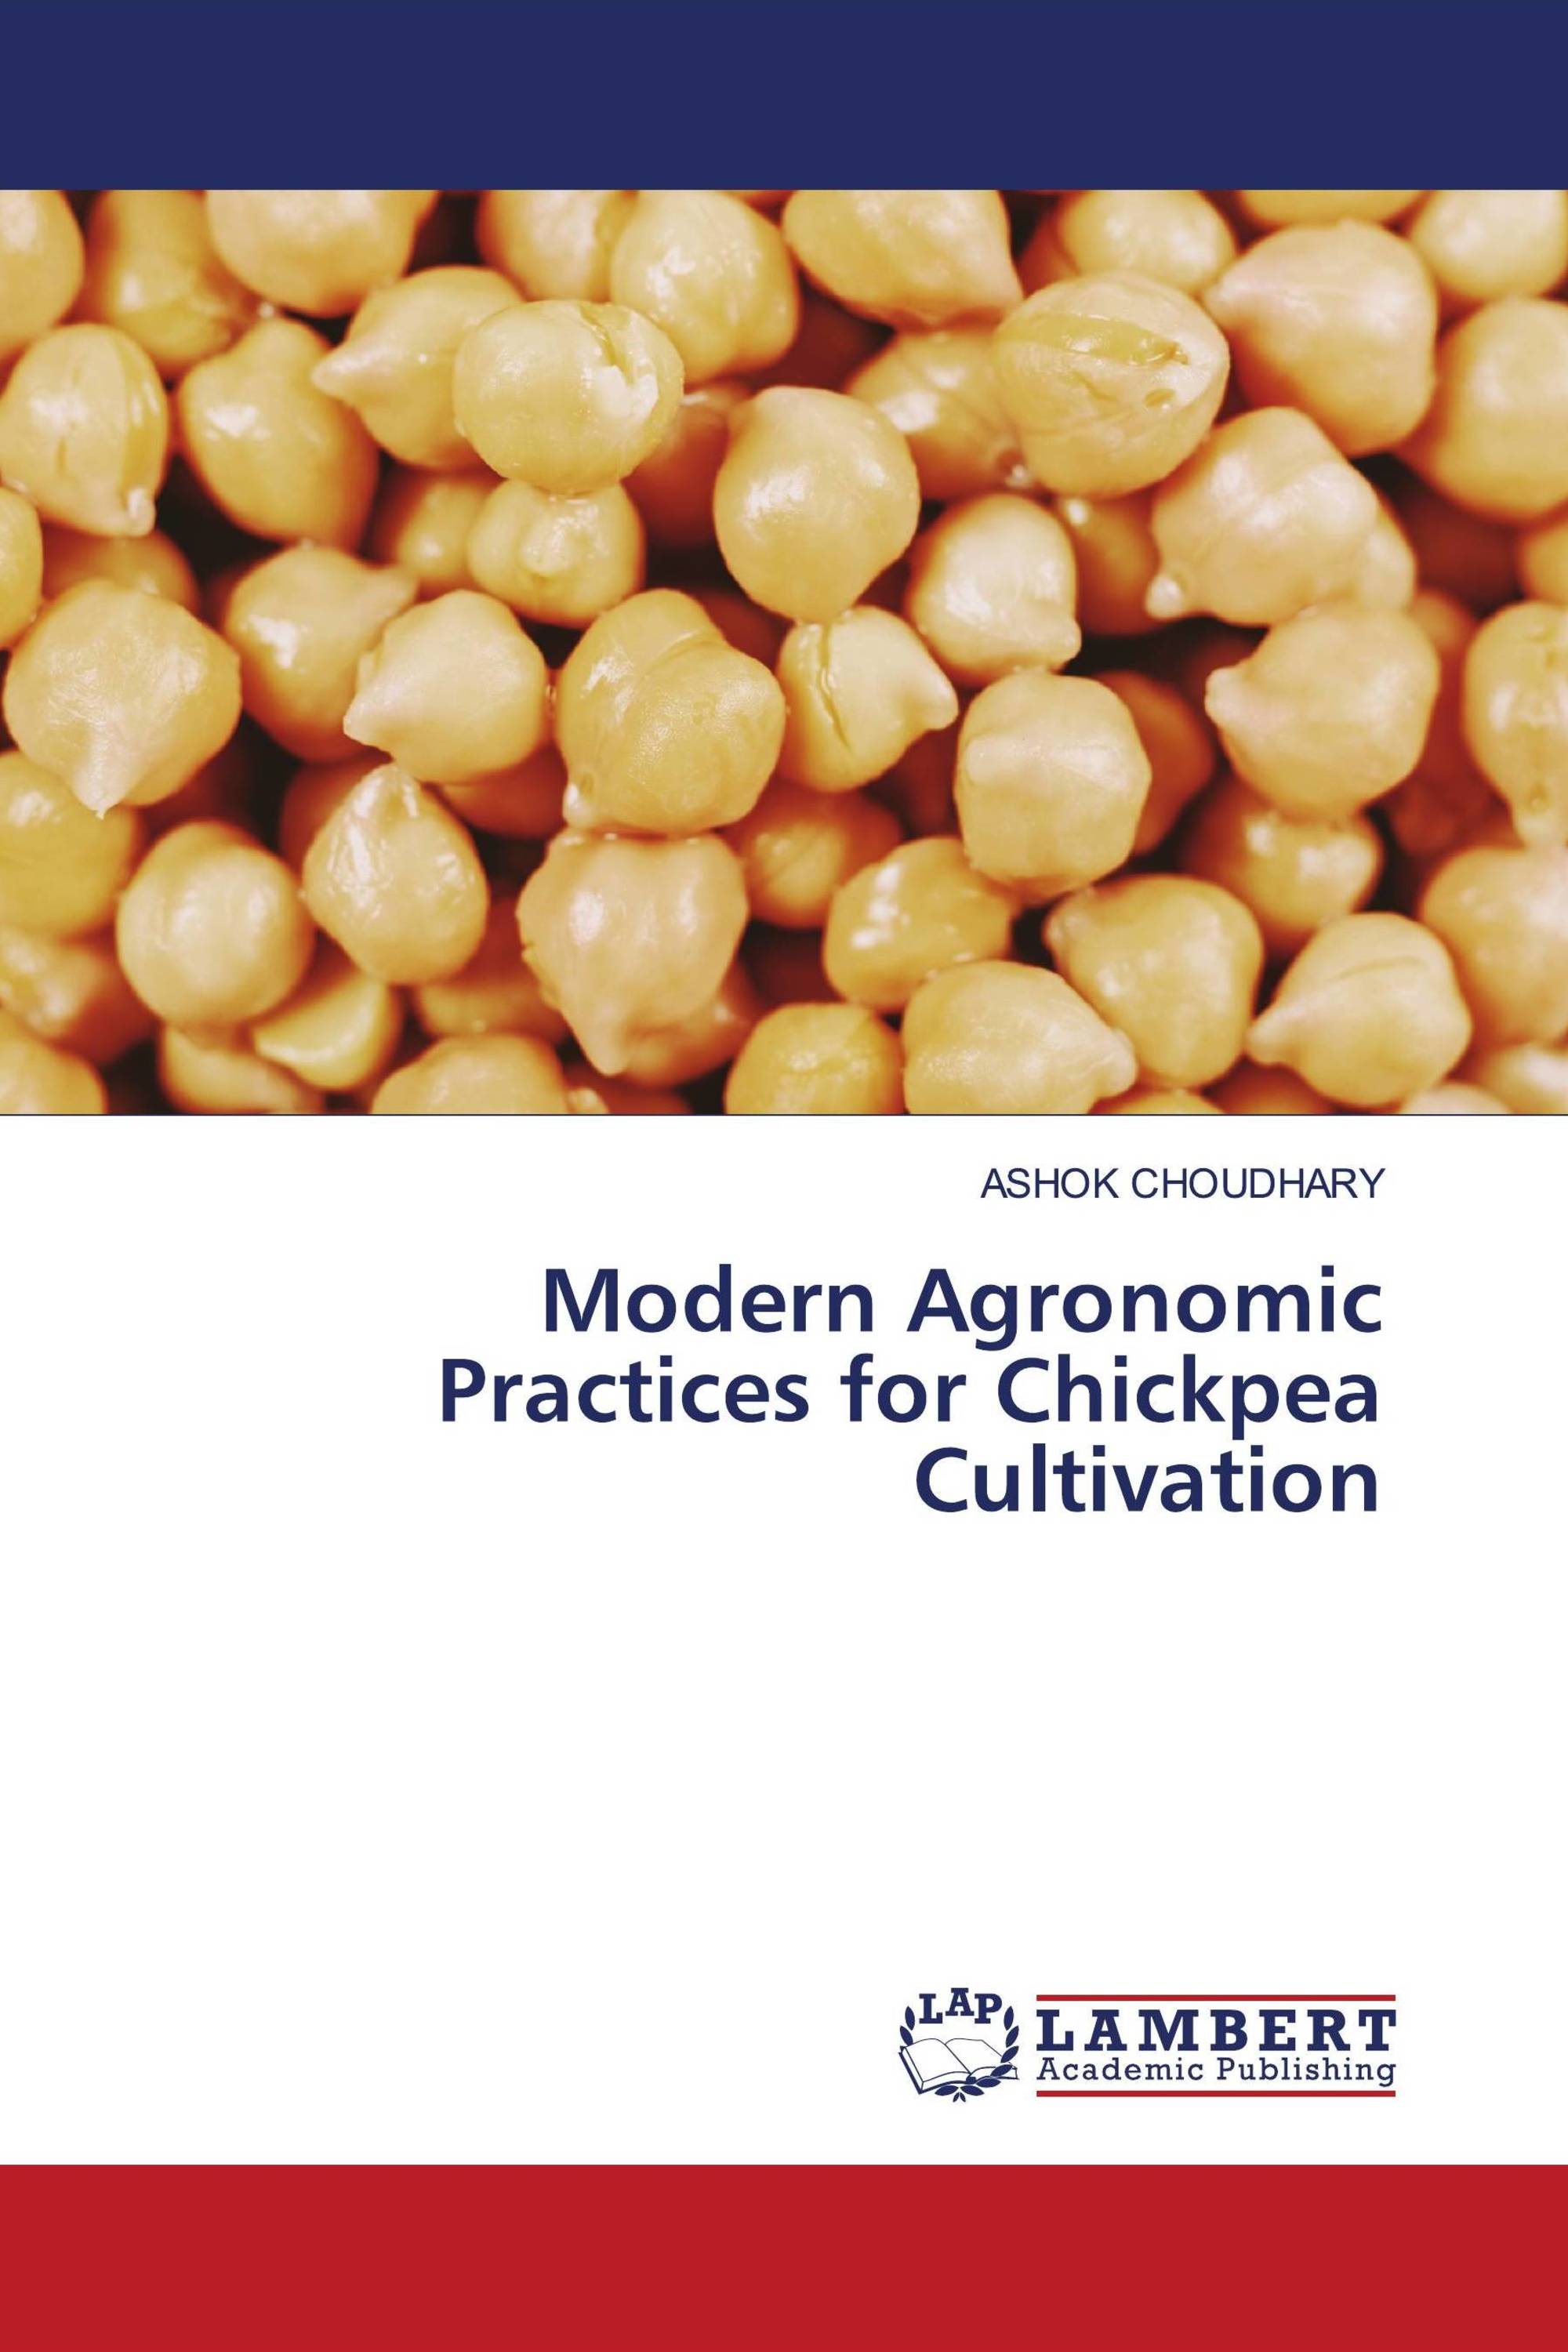 Modern Agronomic Practices for Chickpea Cultivation